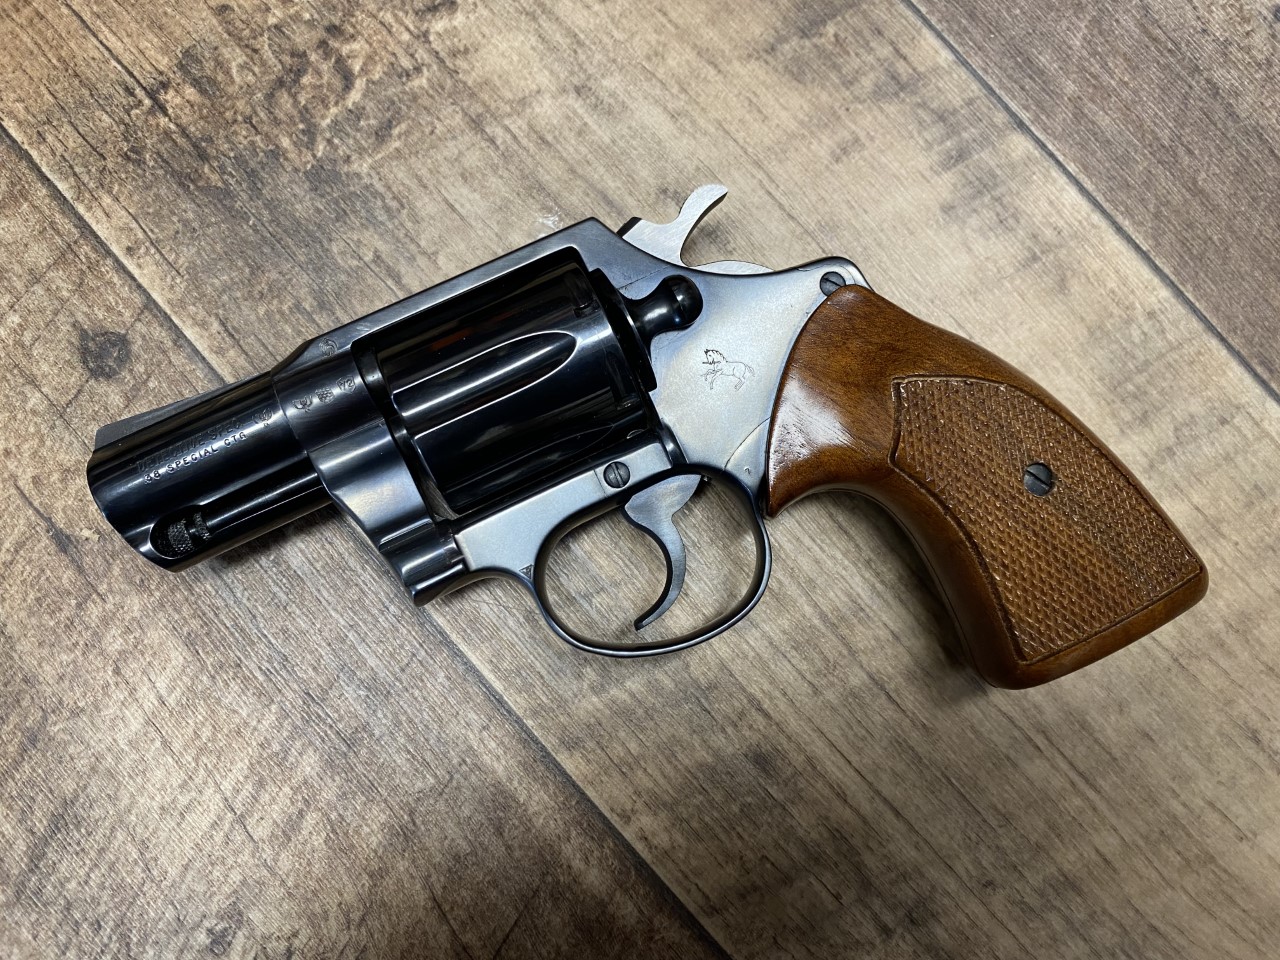 Colt .38 Special 2 Zoll Detective Special